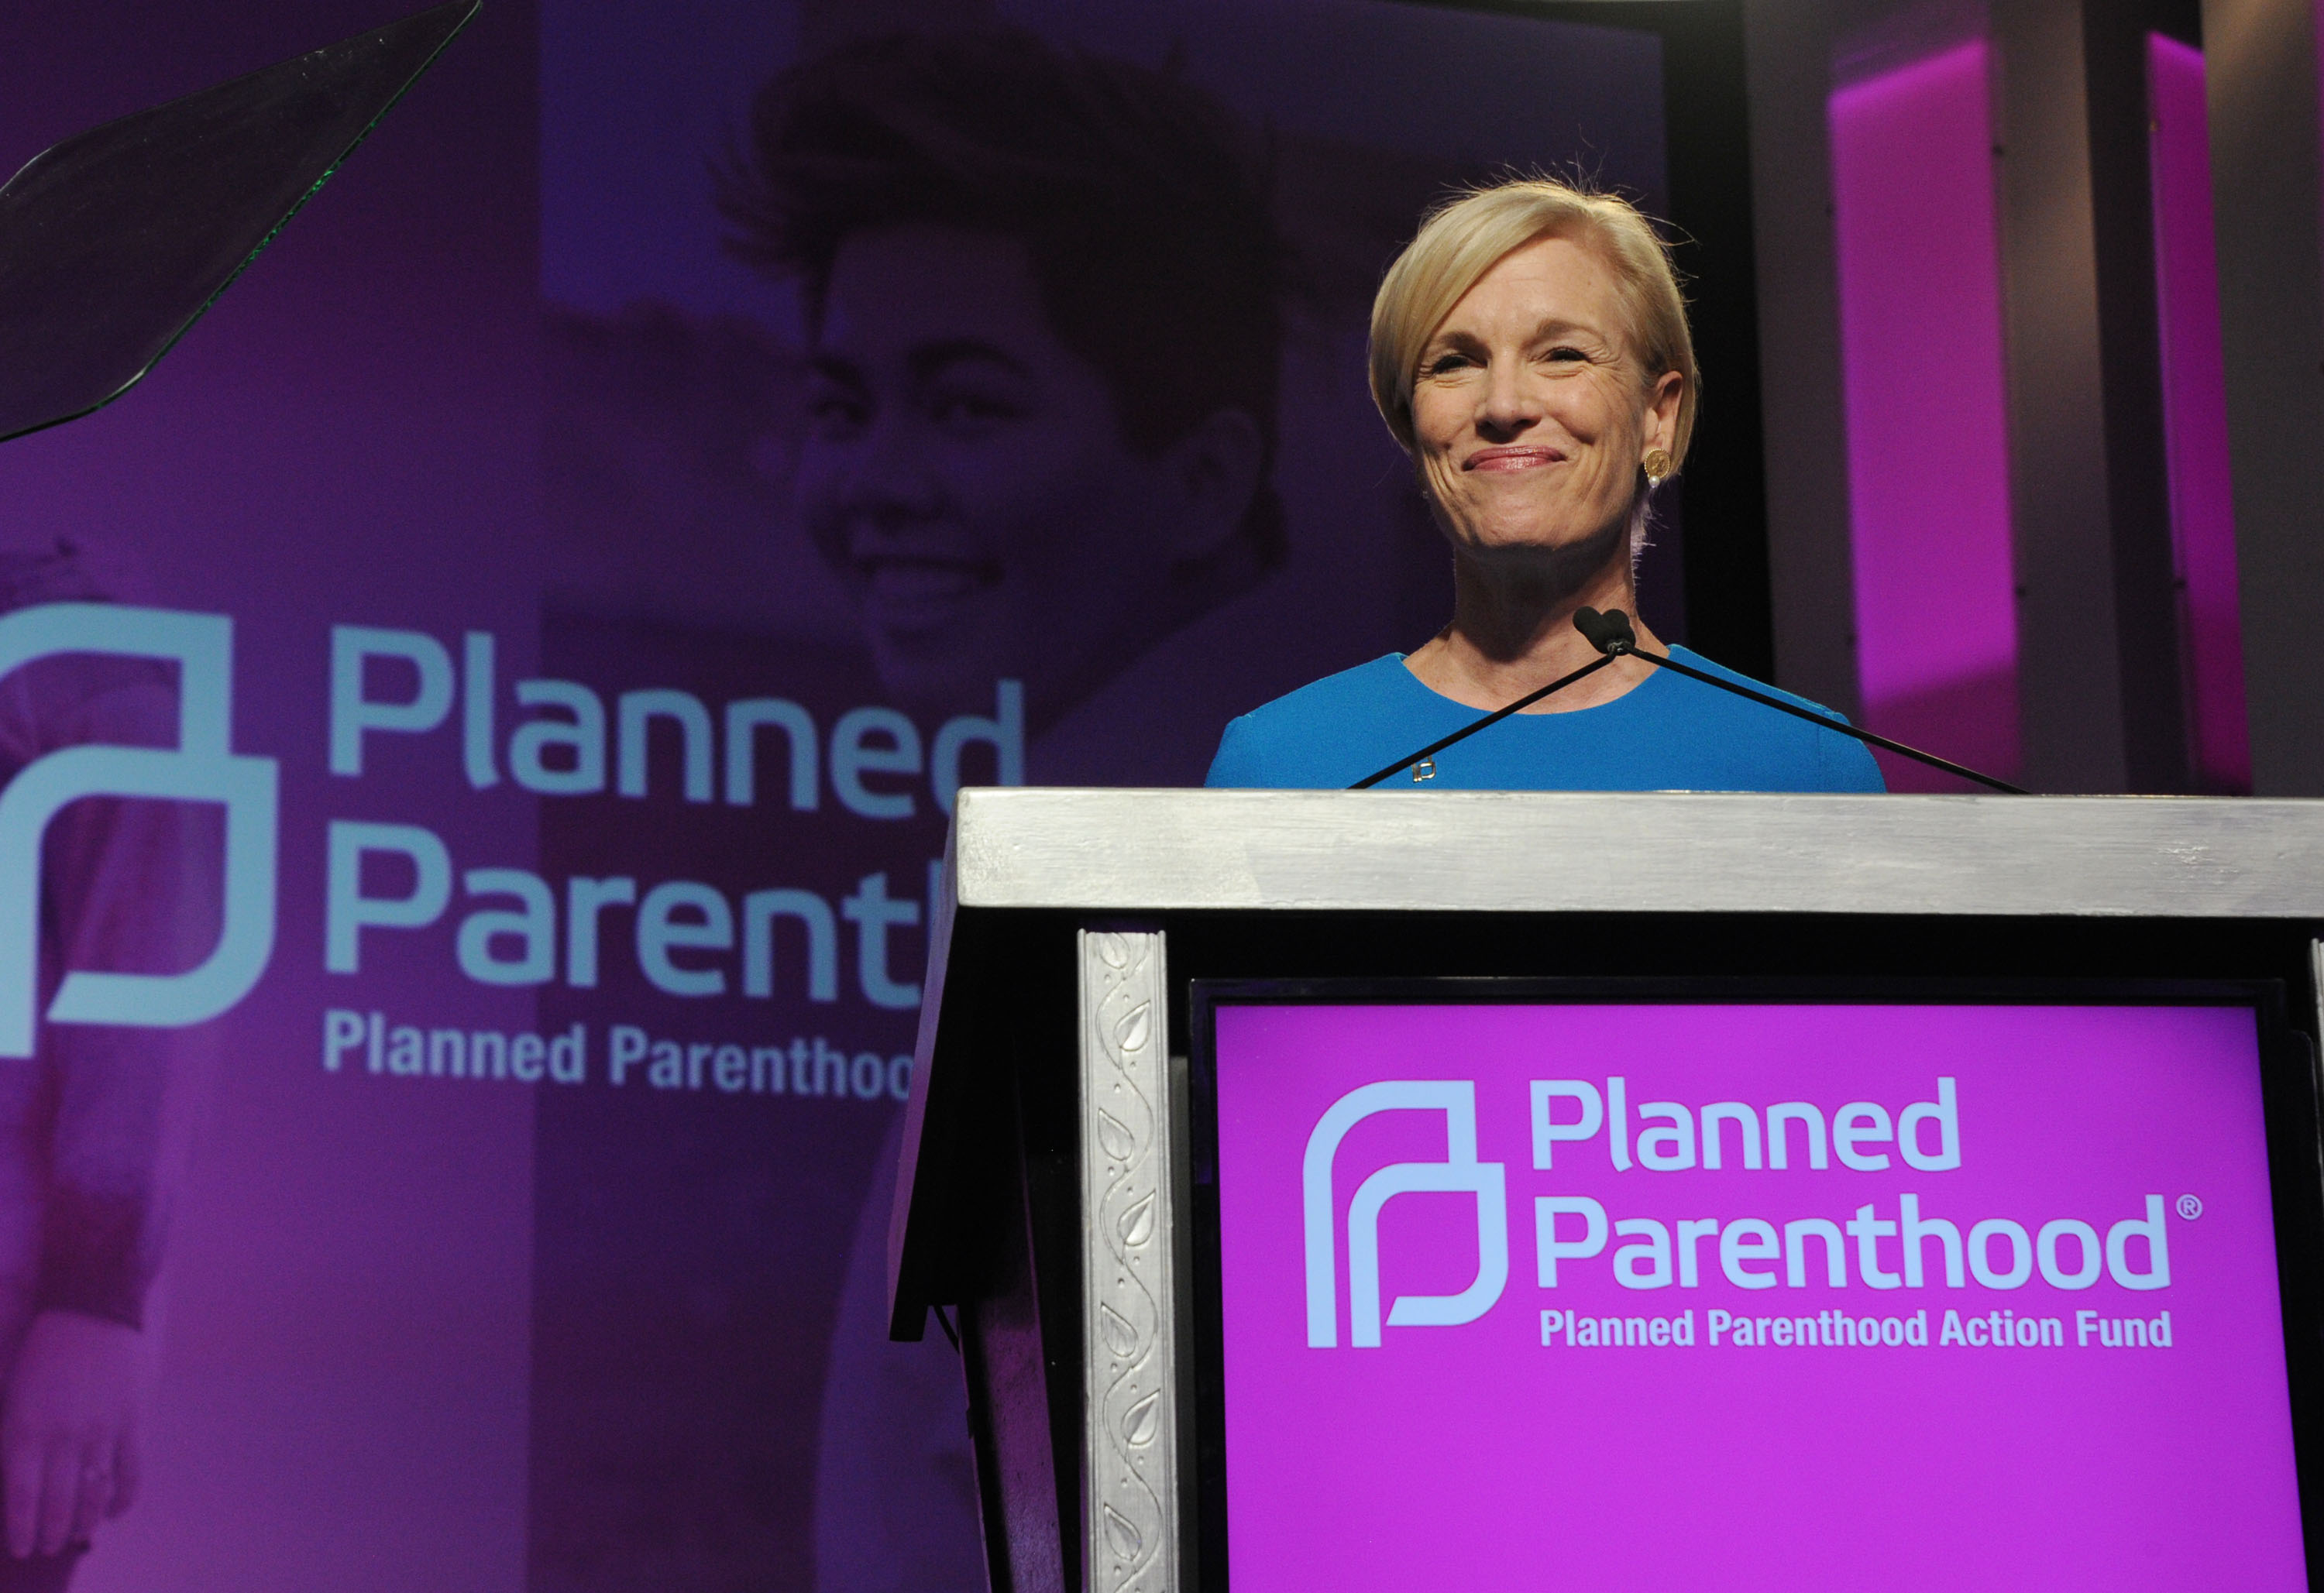 President and CEO Planned Parenthood Cecile Richards onstage at the 2016 Planned Parenthood Action Fund Membership Event held during the Planned Parenthood National Convention at Washington Hilton on June 10, 2016 in Washington, DC. (Jennifer Graylock—WireImage/Getty Images)